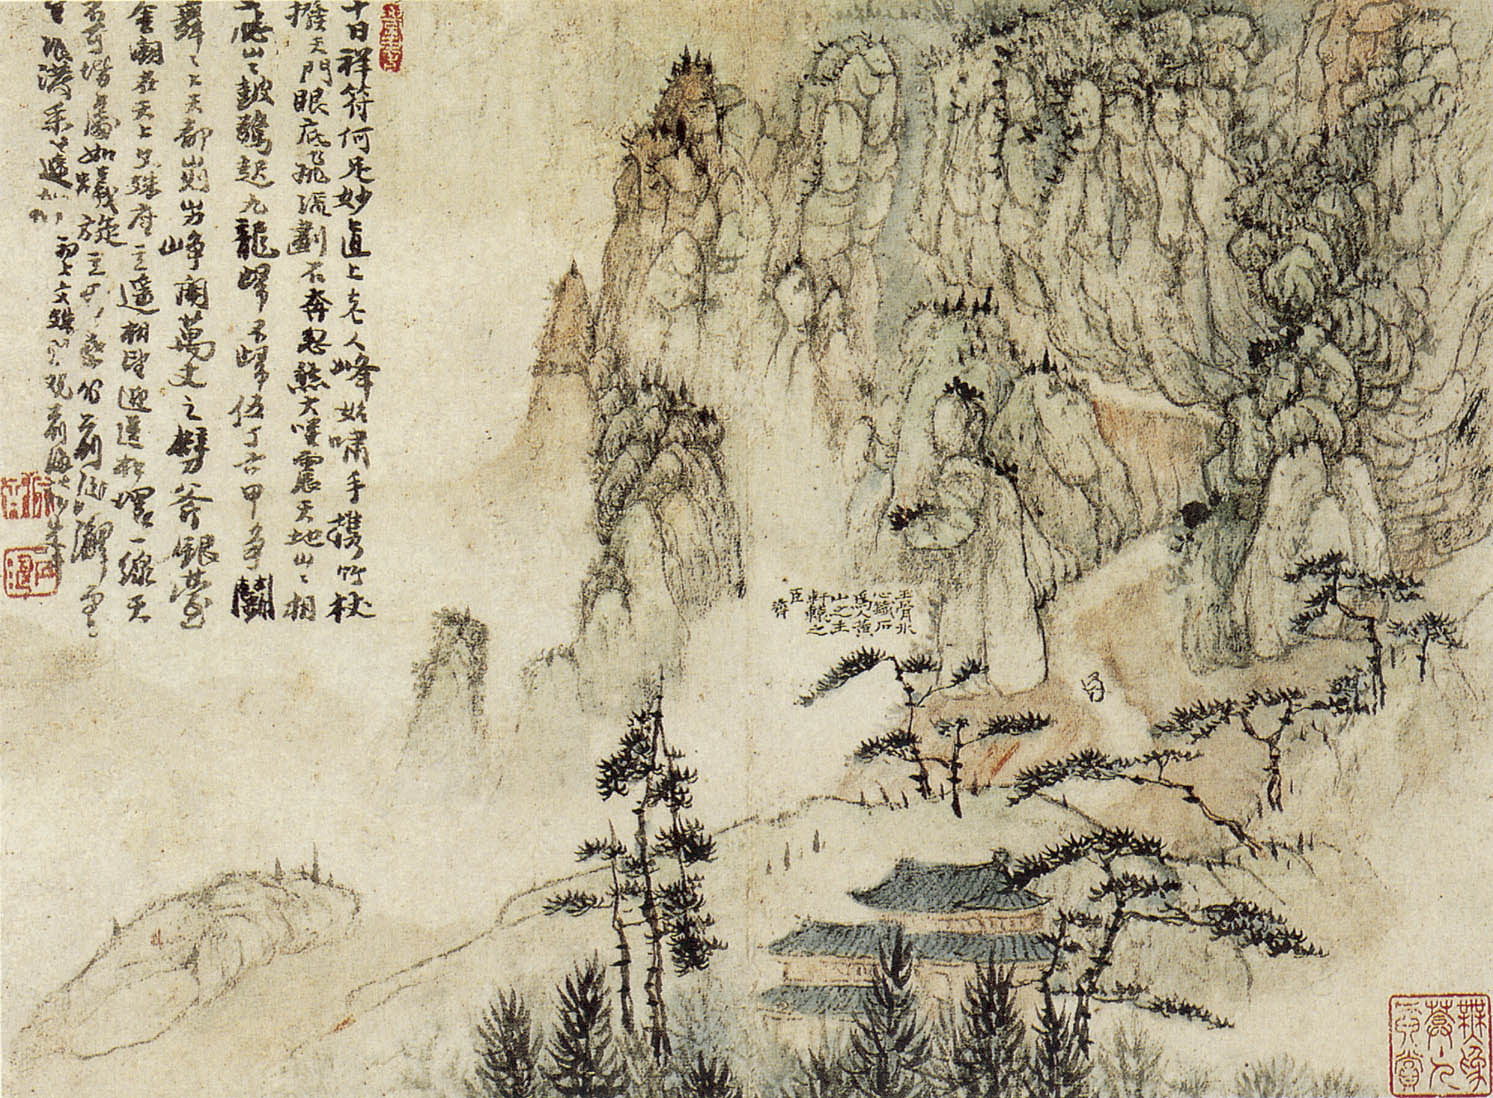 Ink painting and scroll of Mount Huangshan by Shitao in 1670